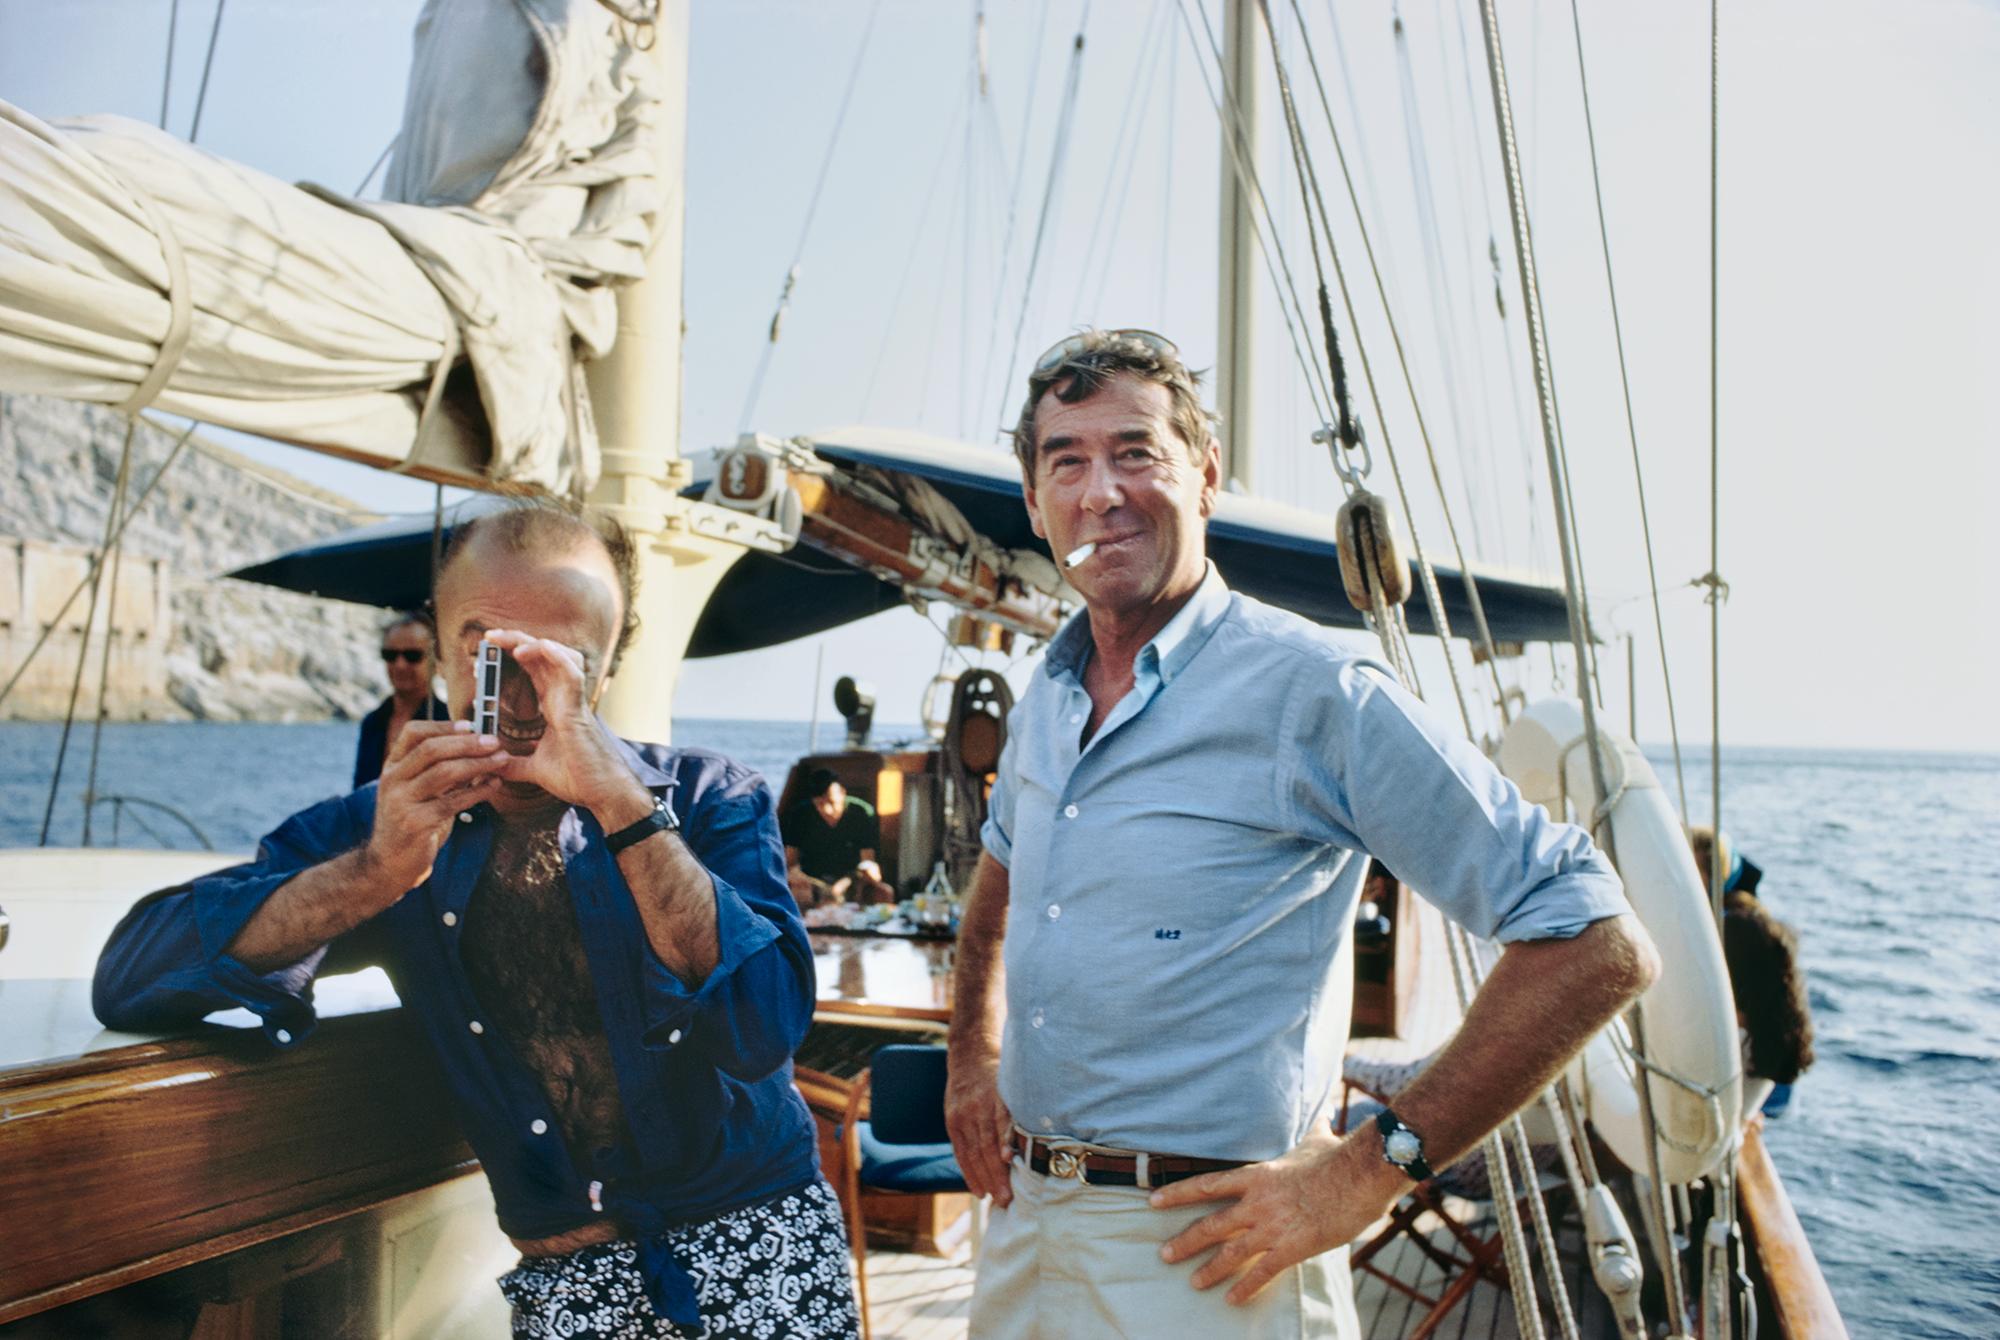 Photographer Slim Aarons (right) on board a yacht off Capri, Italy, September 1968.

Slim Aarons Estate Edition, Certificate of Authenticity included
Numbered and stamped by the Slim Aarons Estate
Collector will receive the next number in the